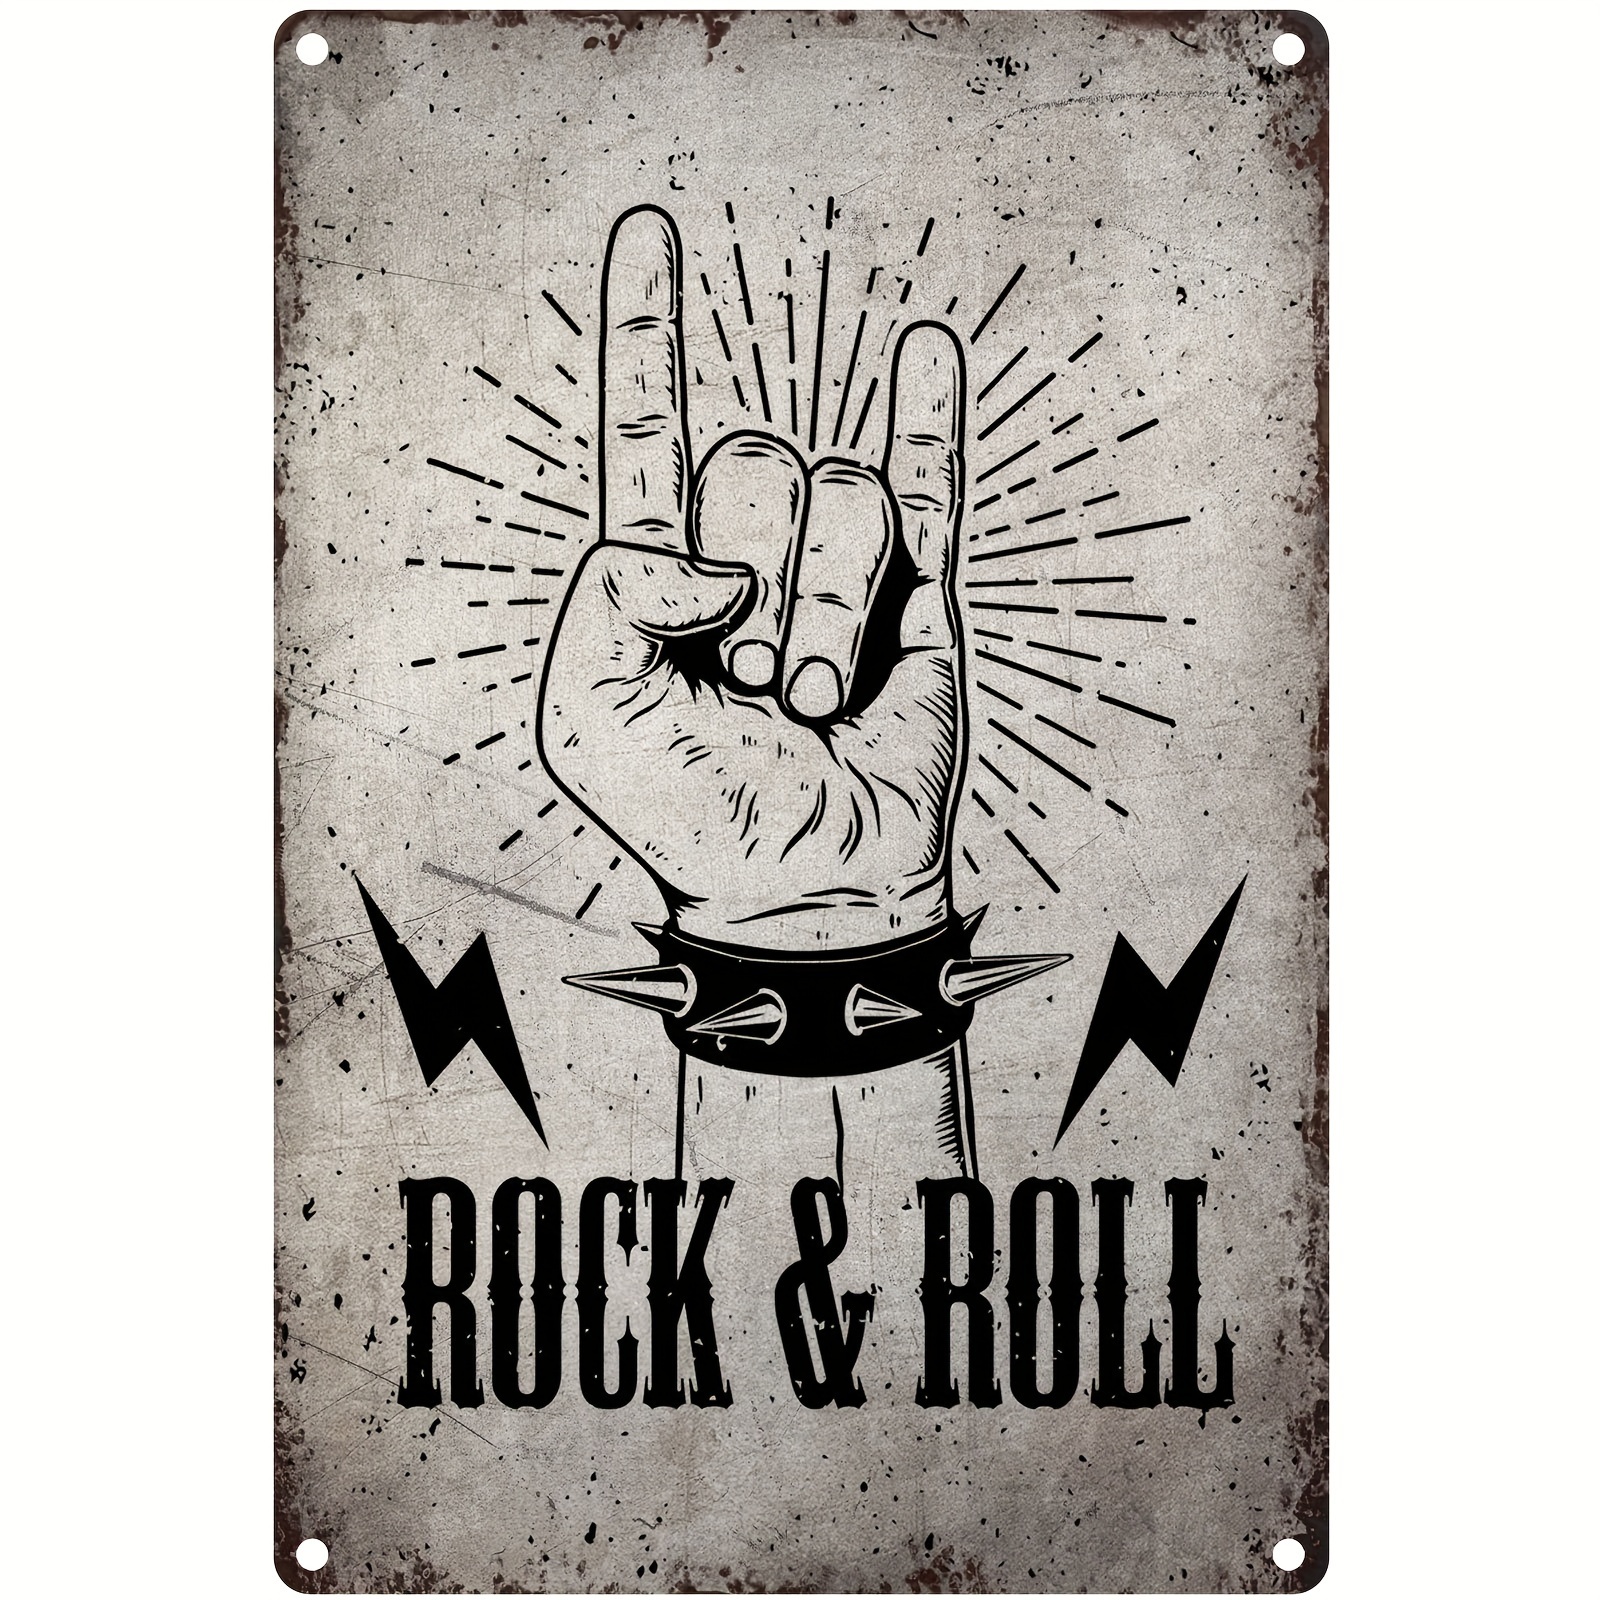 Rock n Roll  Collectible retro metal signs for your wall